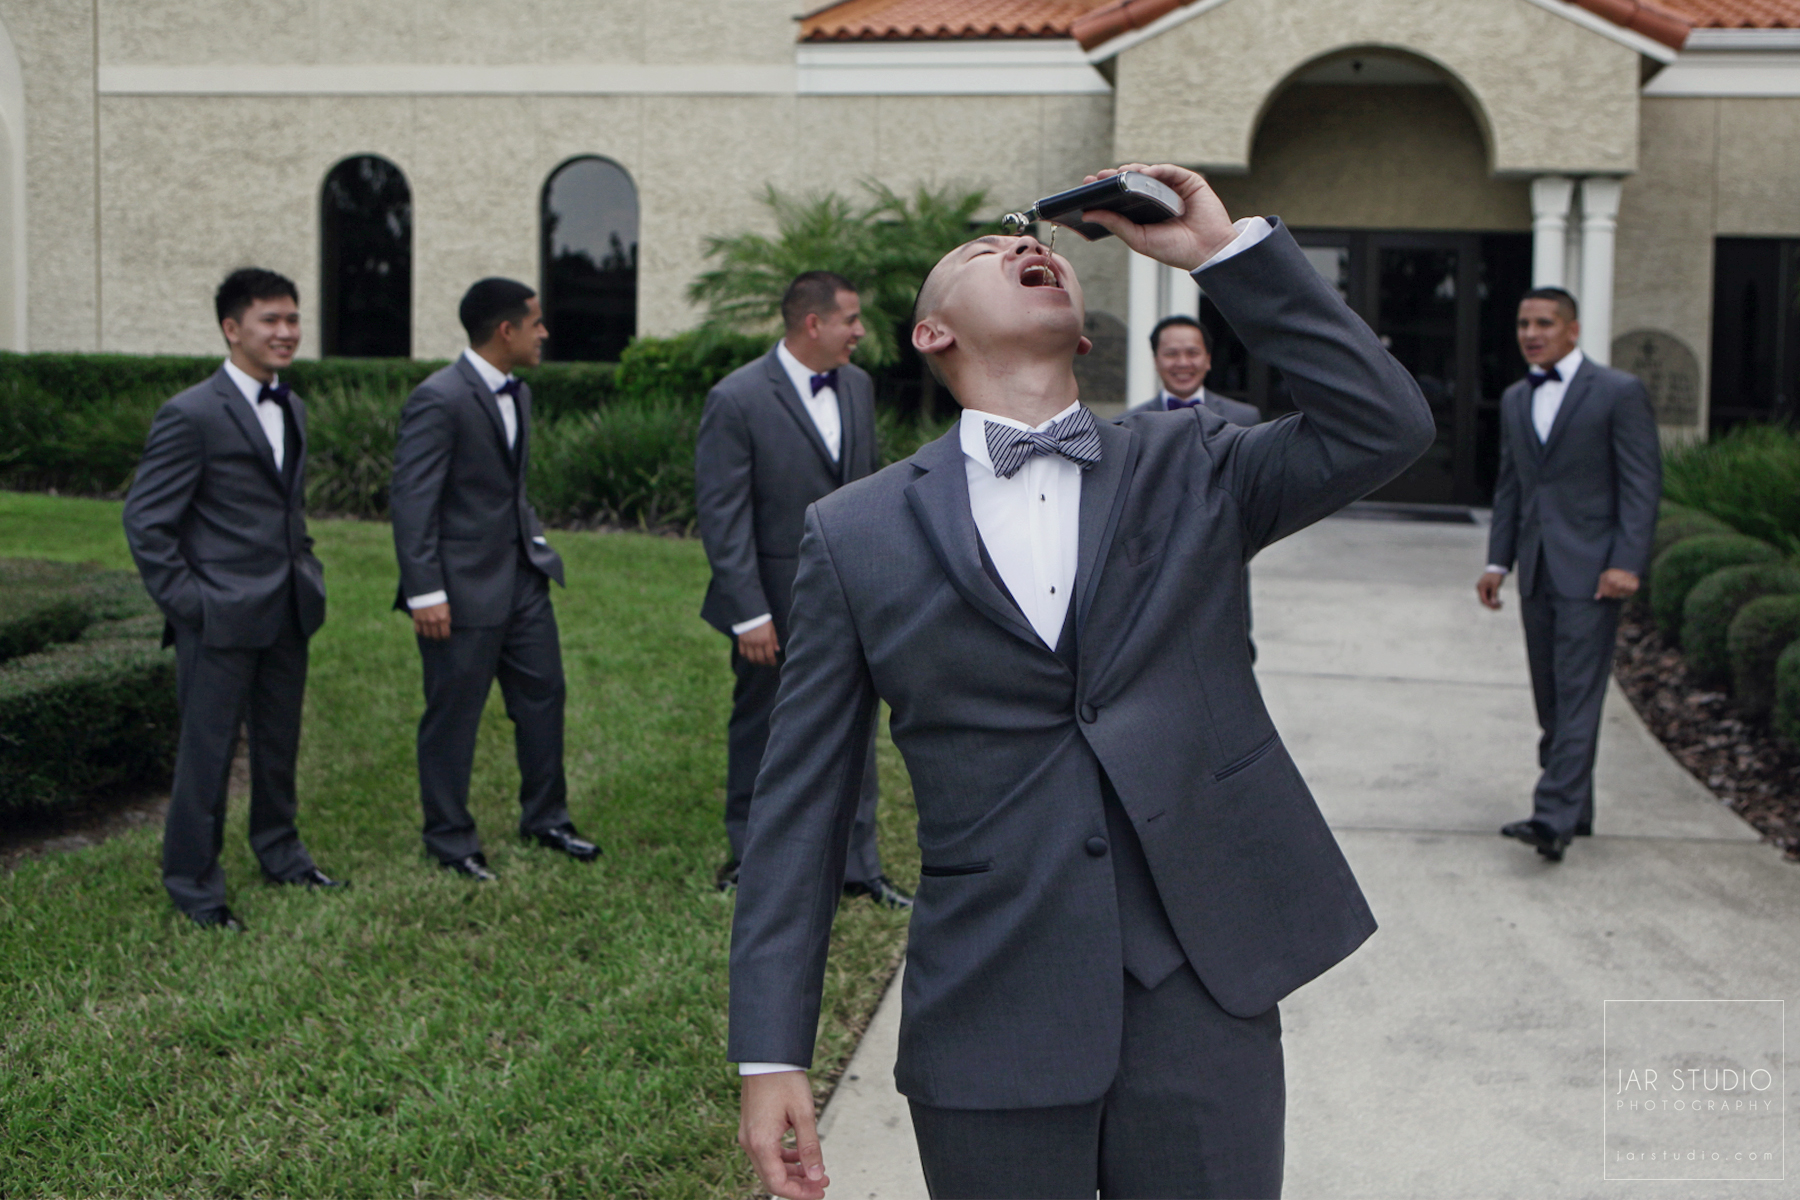 08-groom-getting-hitched-day-fun-photography-orlando.JPG